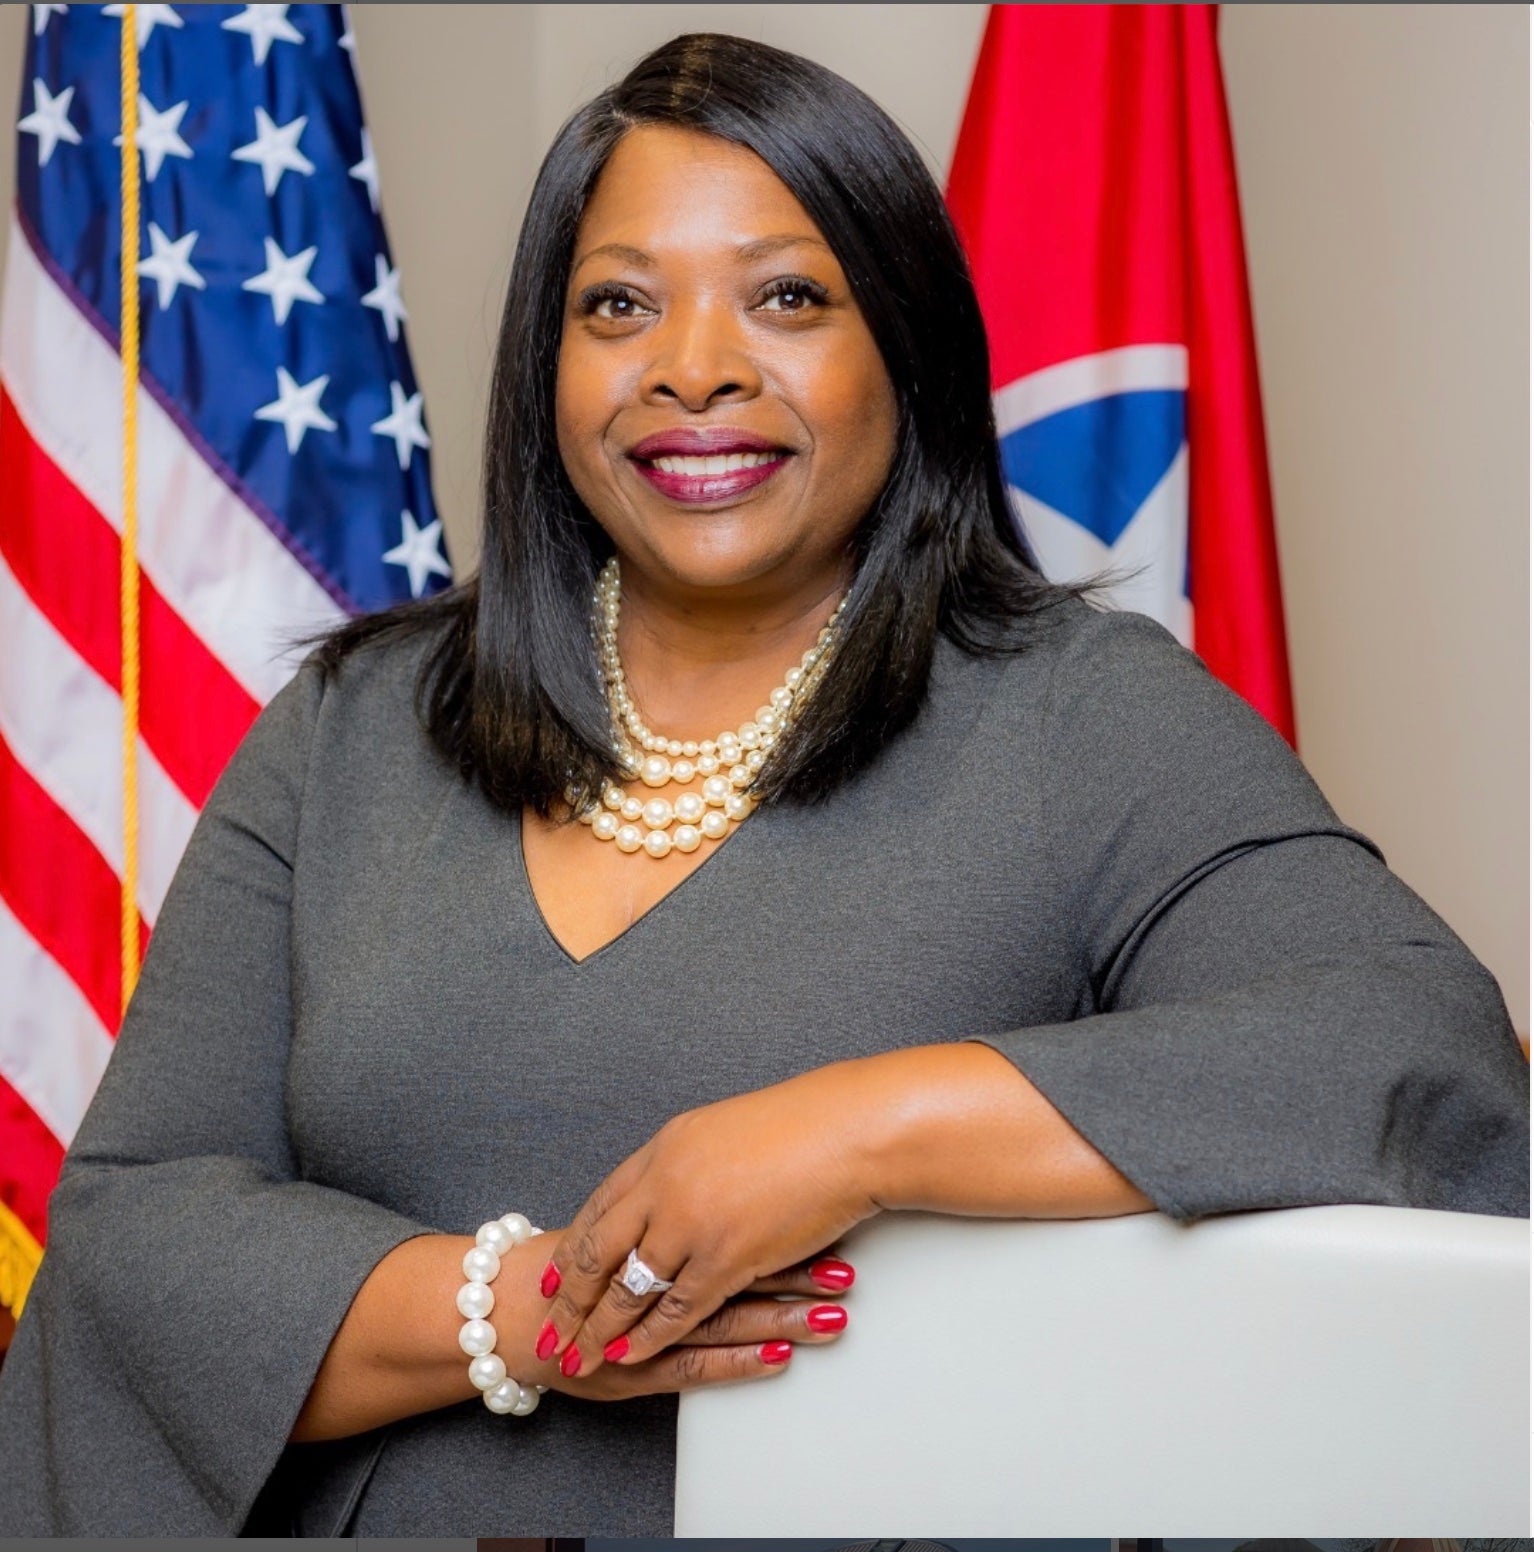 Tennessee Community College Mourns The Loss Of President,        Dr. Orinthia Montague